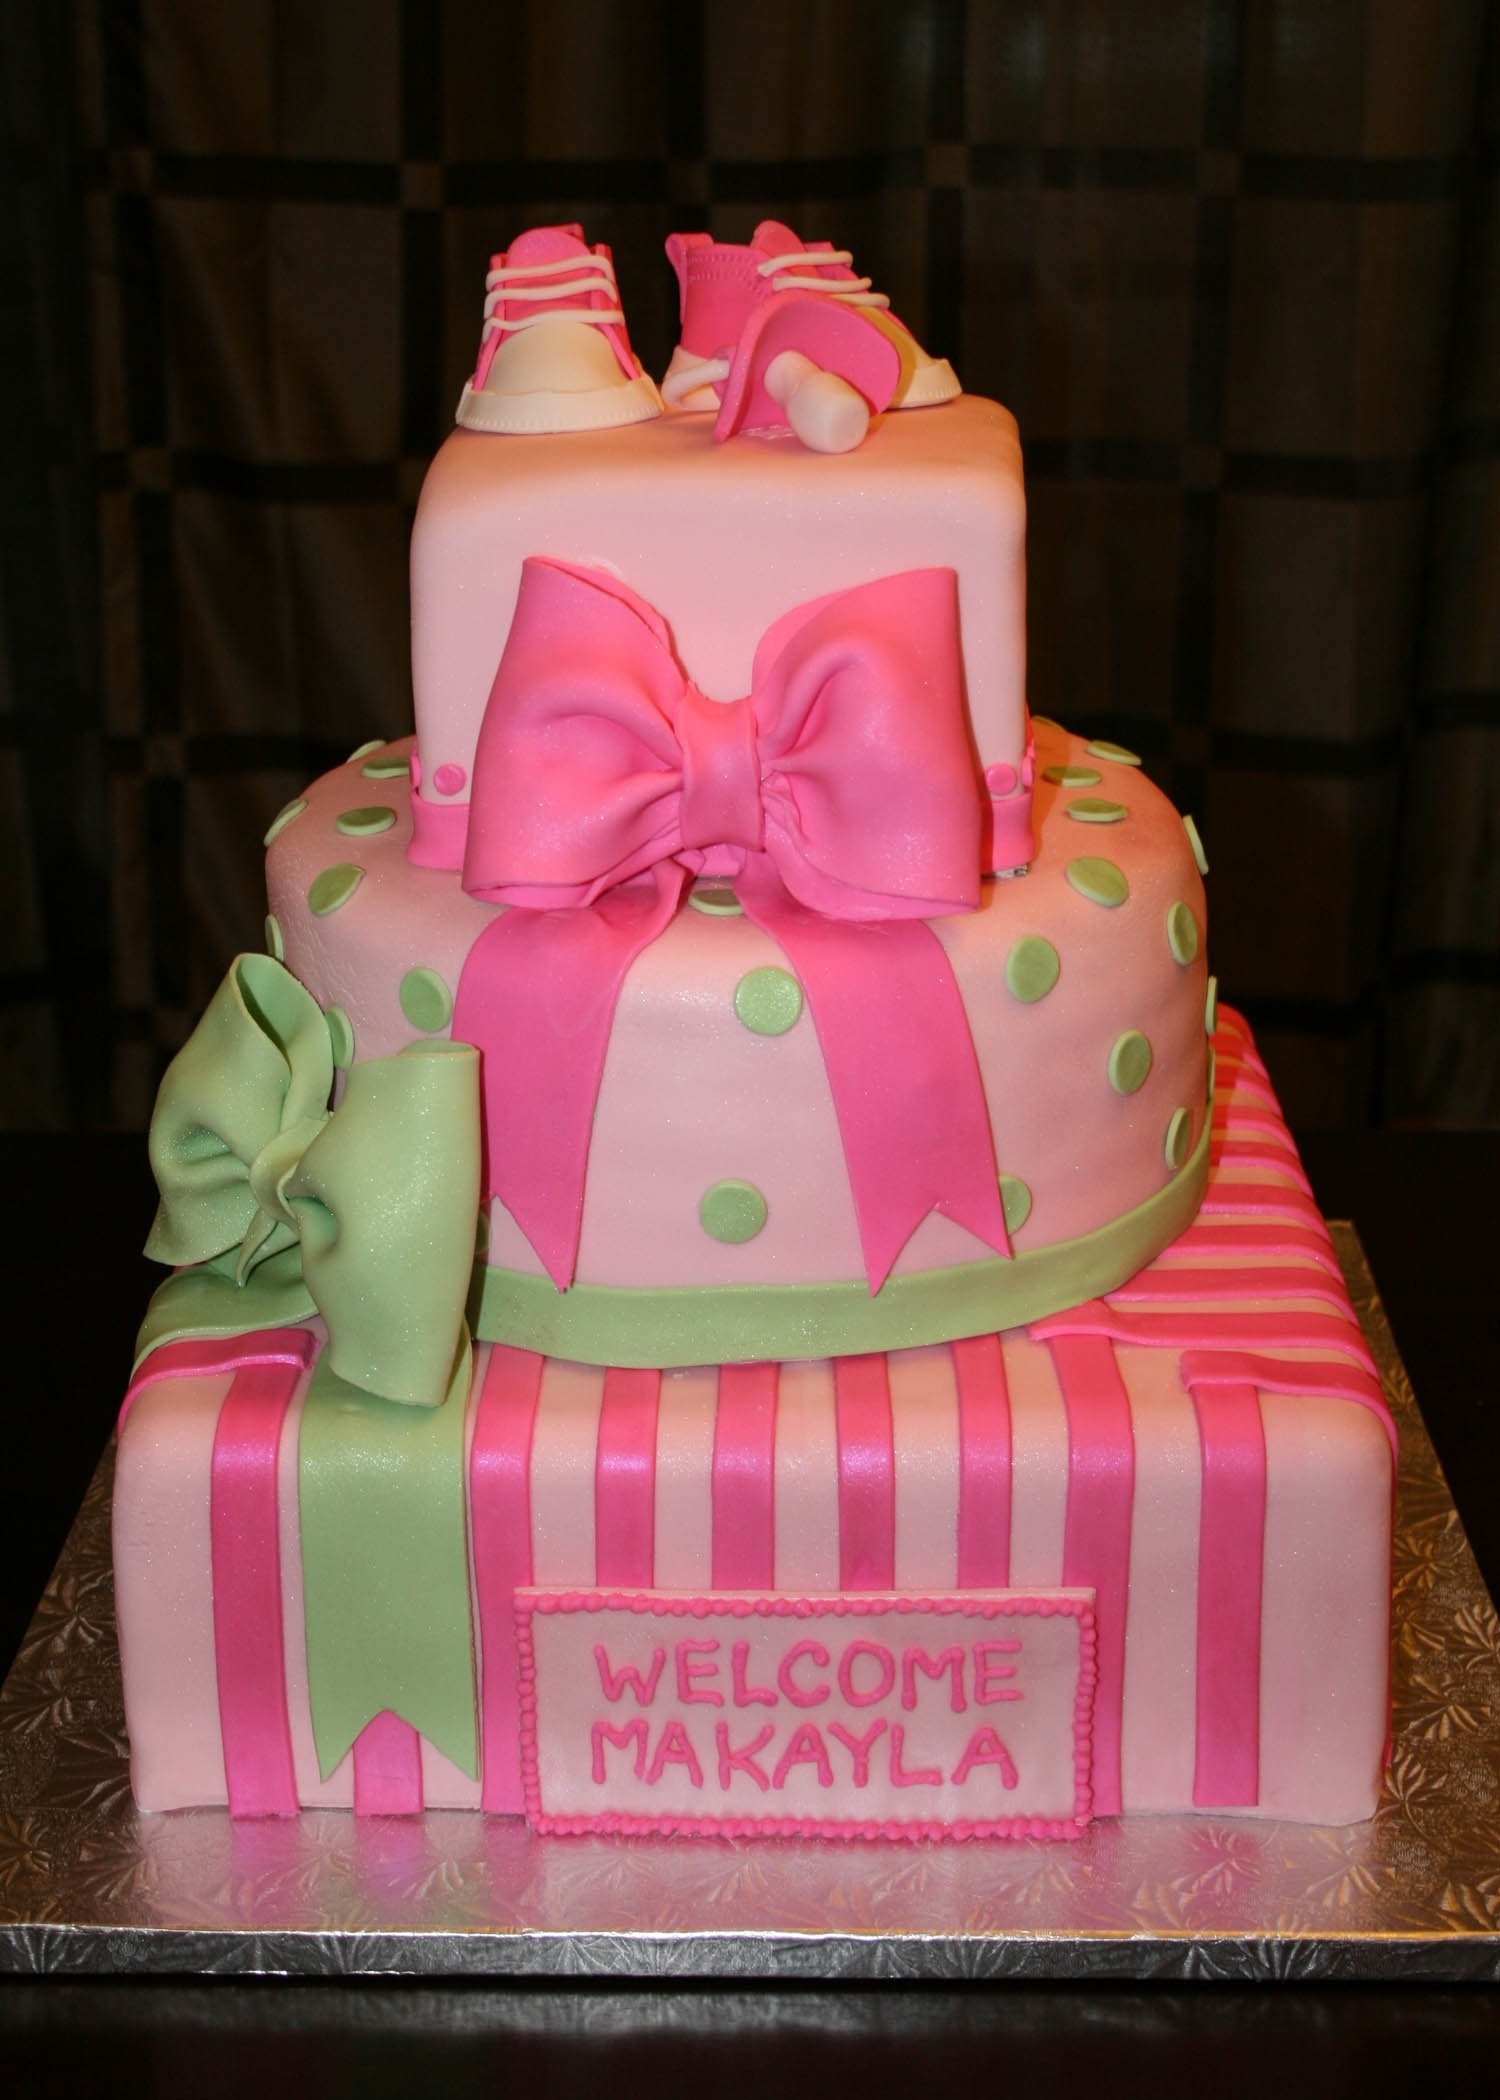 10 Ideal Baby Shower Cake Decoration Ideas baby shower cakes not made with fondant wall no cake designs ideas 2022